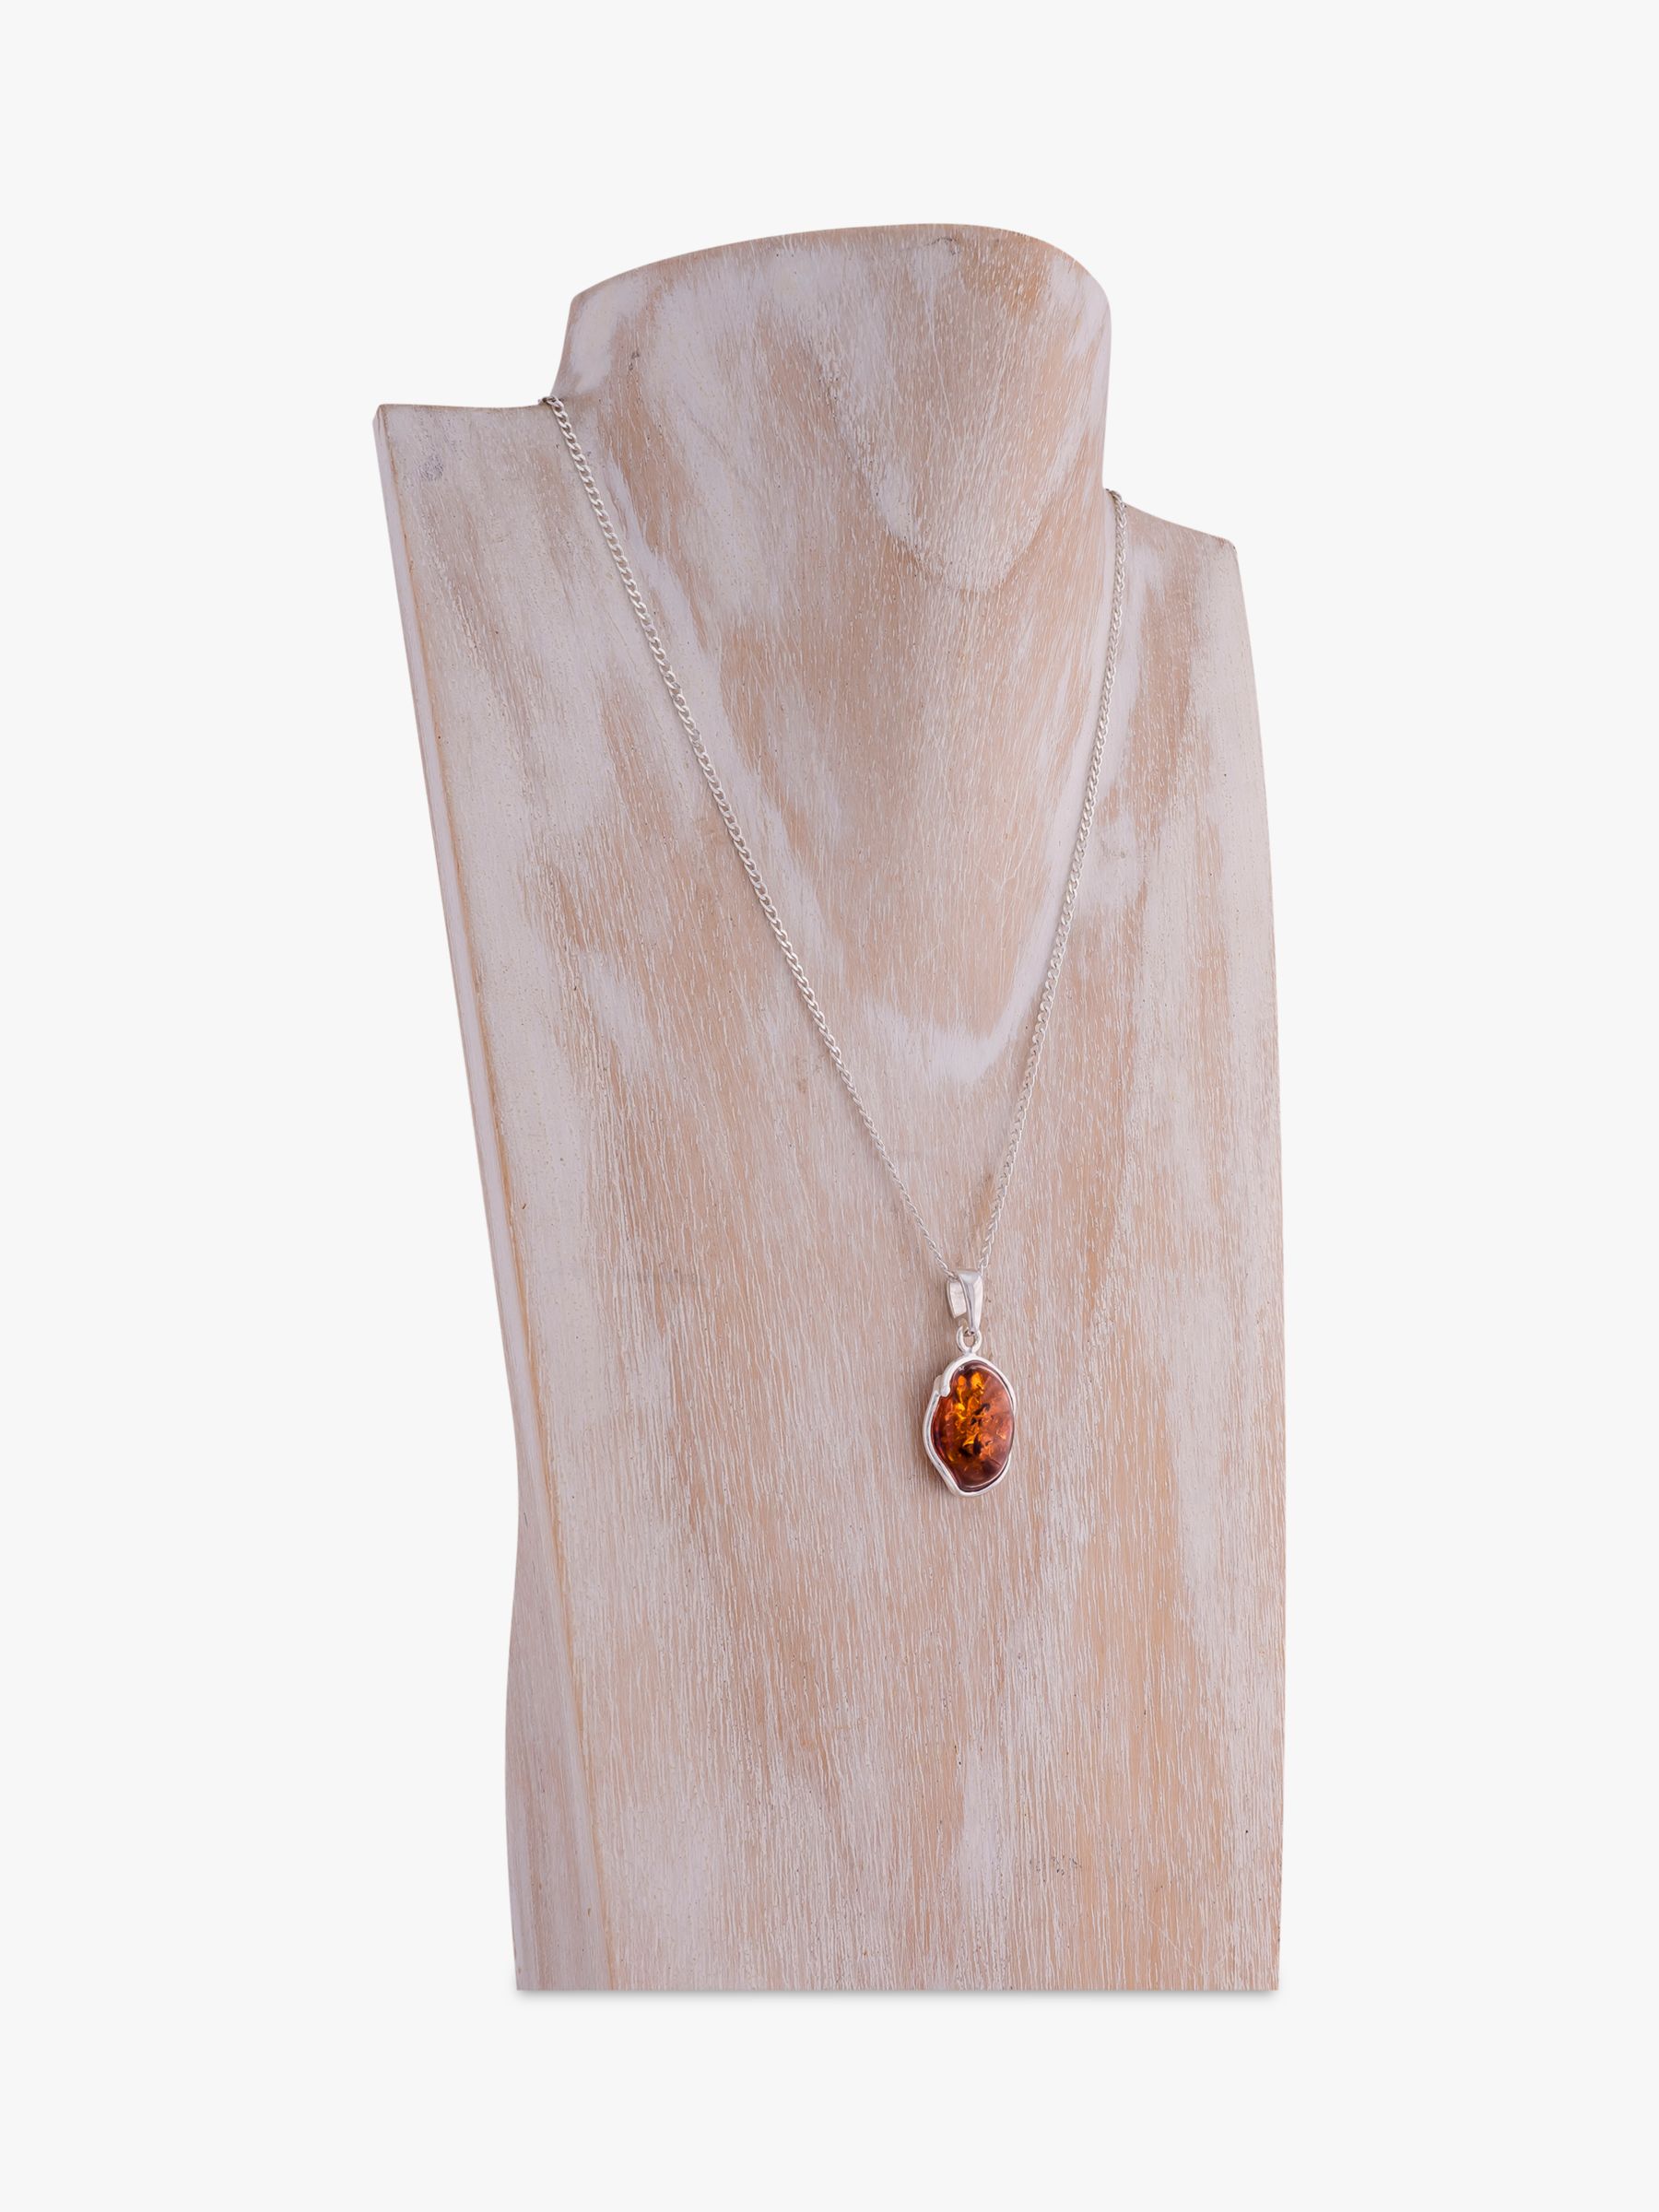 Buy Be-Jewelled Baltic Amber Pendant Necklace, Silver/Cognac Online at johnlewis.com